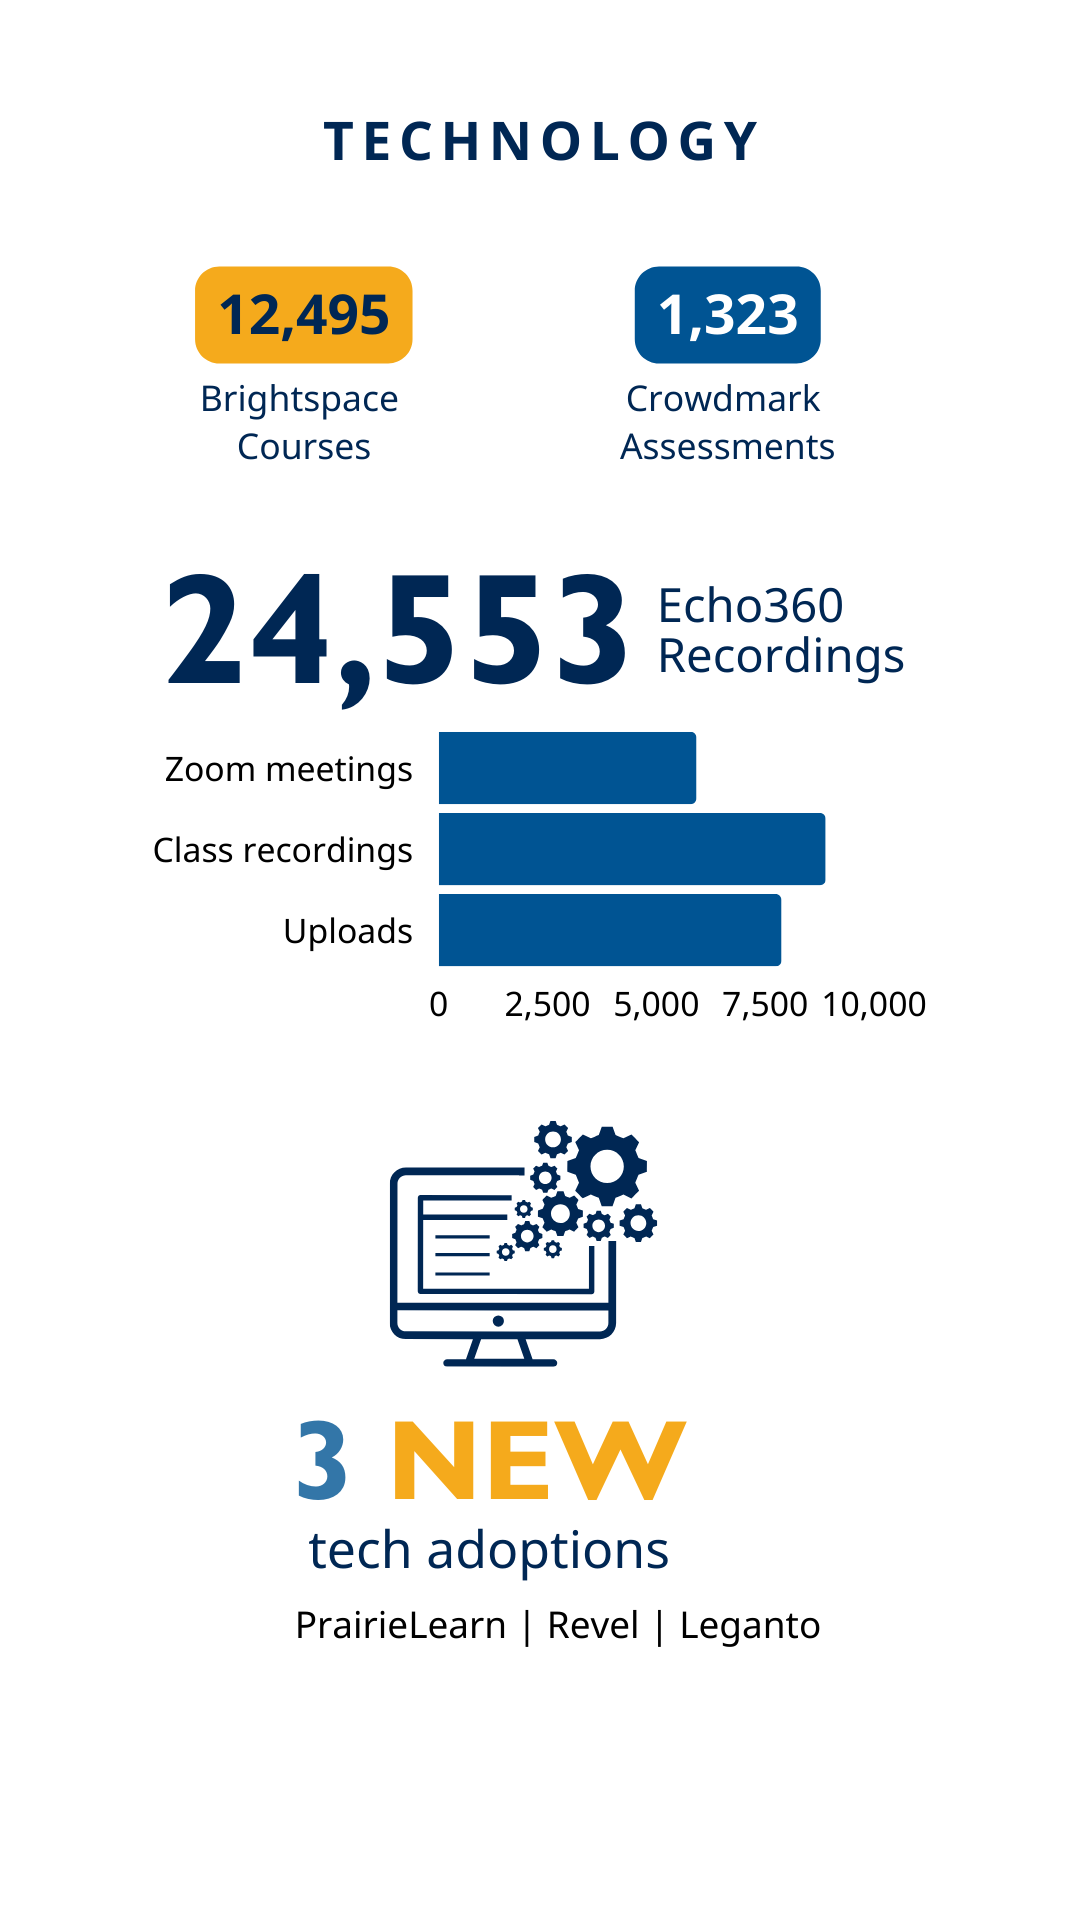 A graphic titled 'TECHNOLOGY' displaying statistics for technology usage in education. It shows 12,495 Brightspace Courses, 1,323 Crowdmark Assessments, 24,553 Echo360 Recordings, and highlights '3 NEW' tech adoptions with corresponding icons for online platforms and recordings